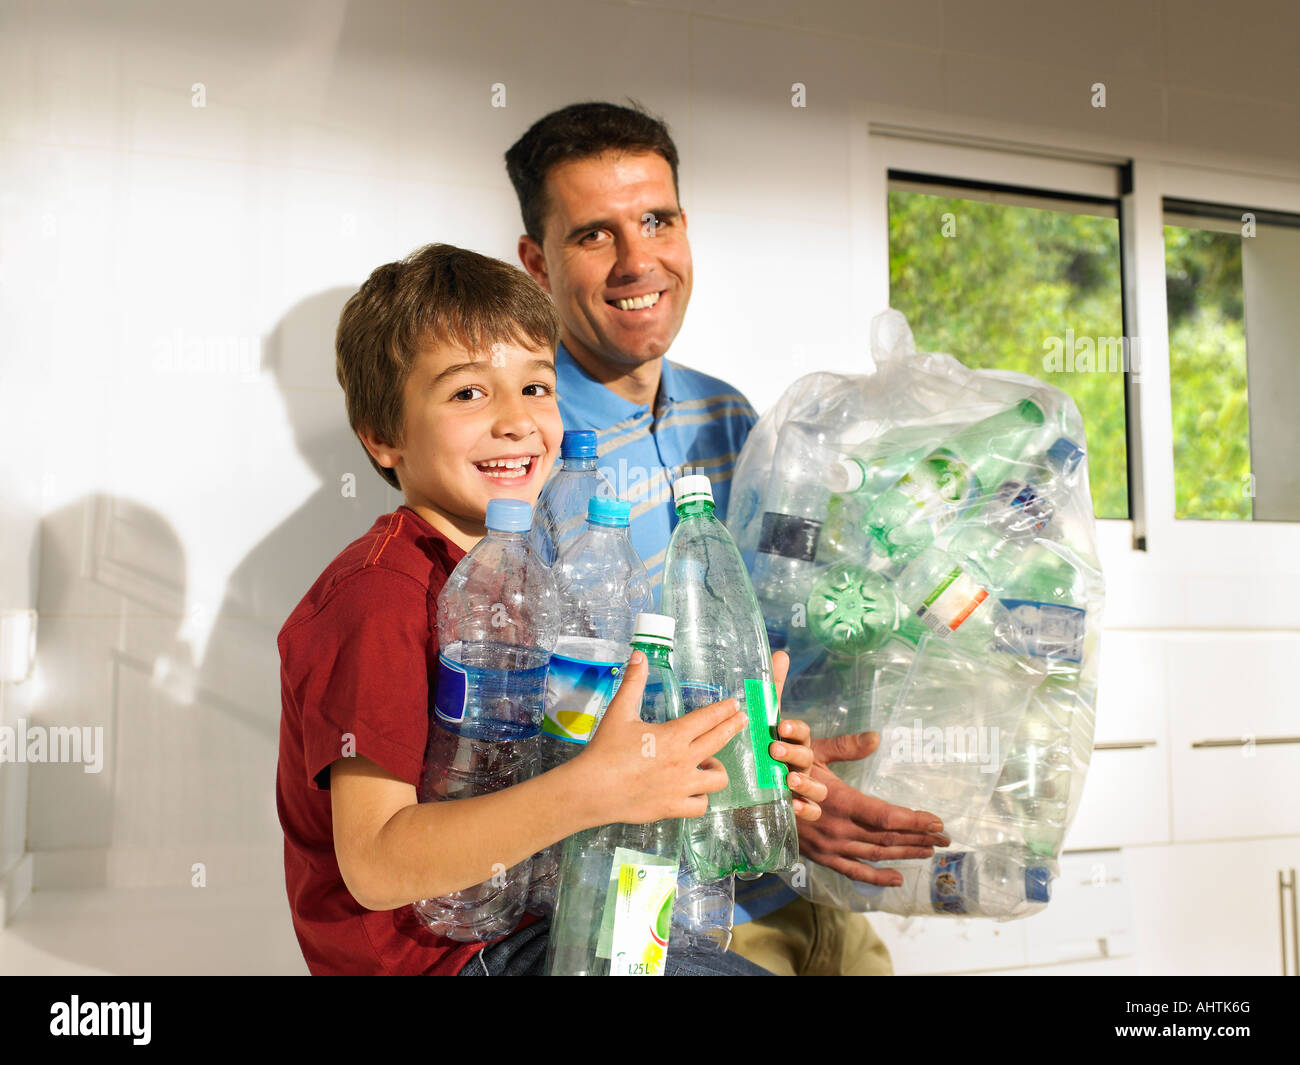 https://c8.alamy.com/comp/AHTK6G/father-and-son-6-8-recycling-plastic-bottles-smiling-AHTK6G.jpg